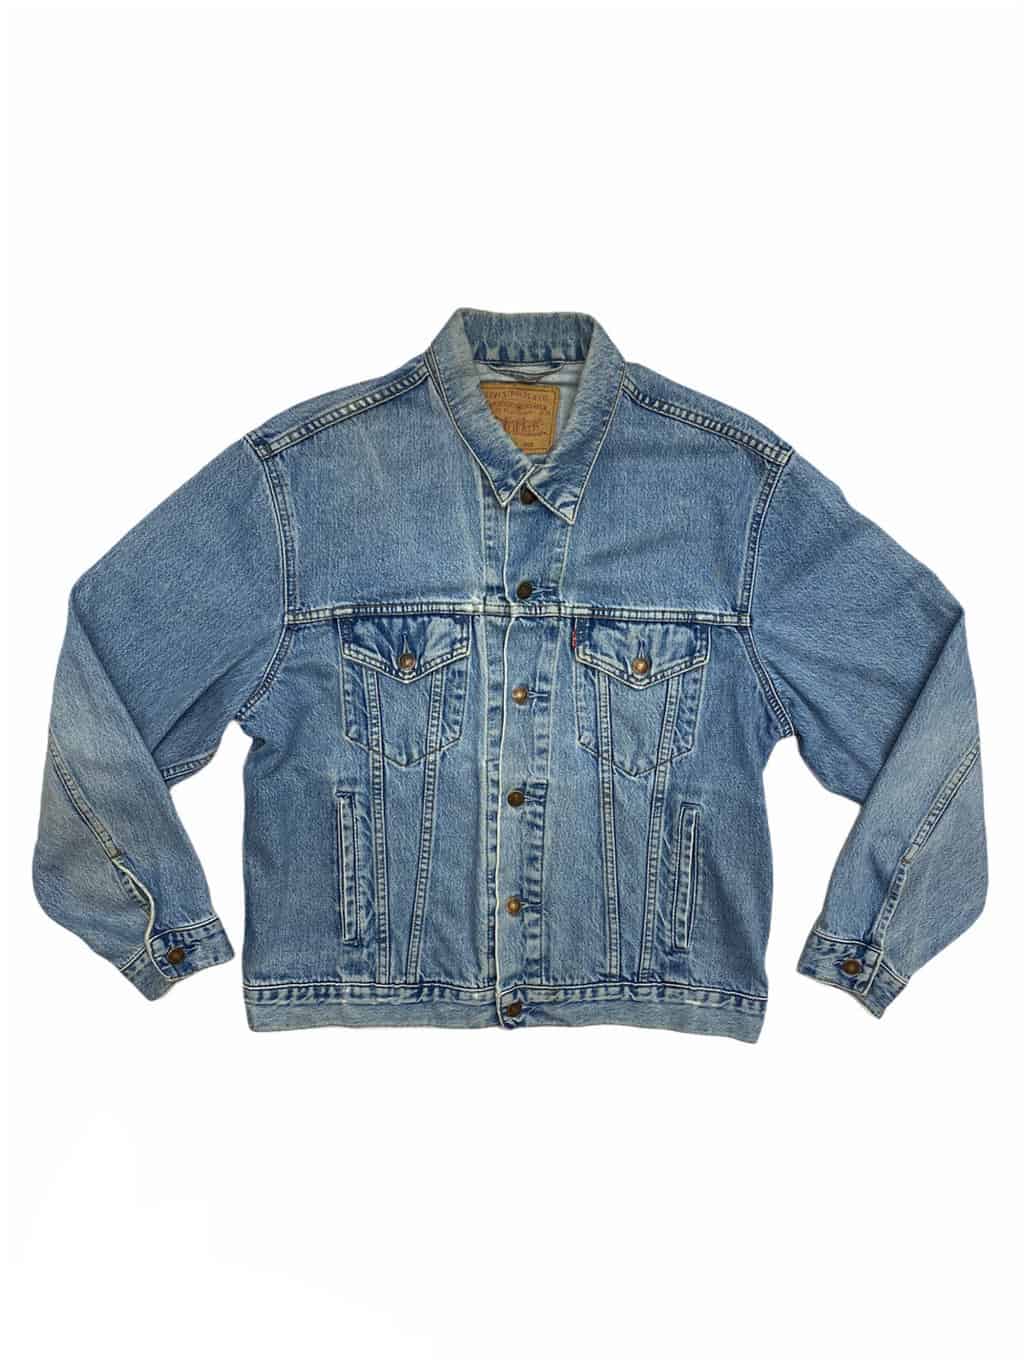 Vintage 90s Levis trucker jacket 70503 in stonewash blue denim with red tag  - Large